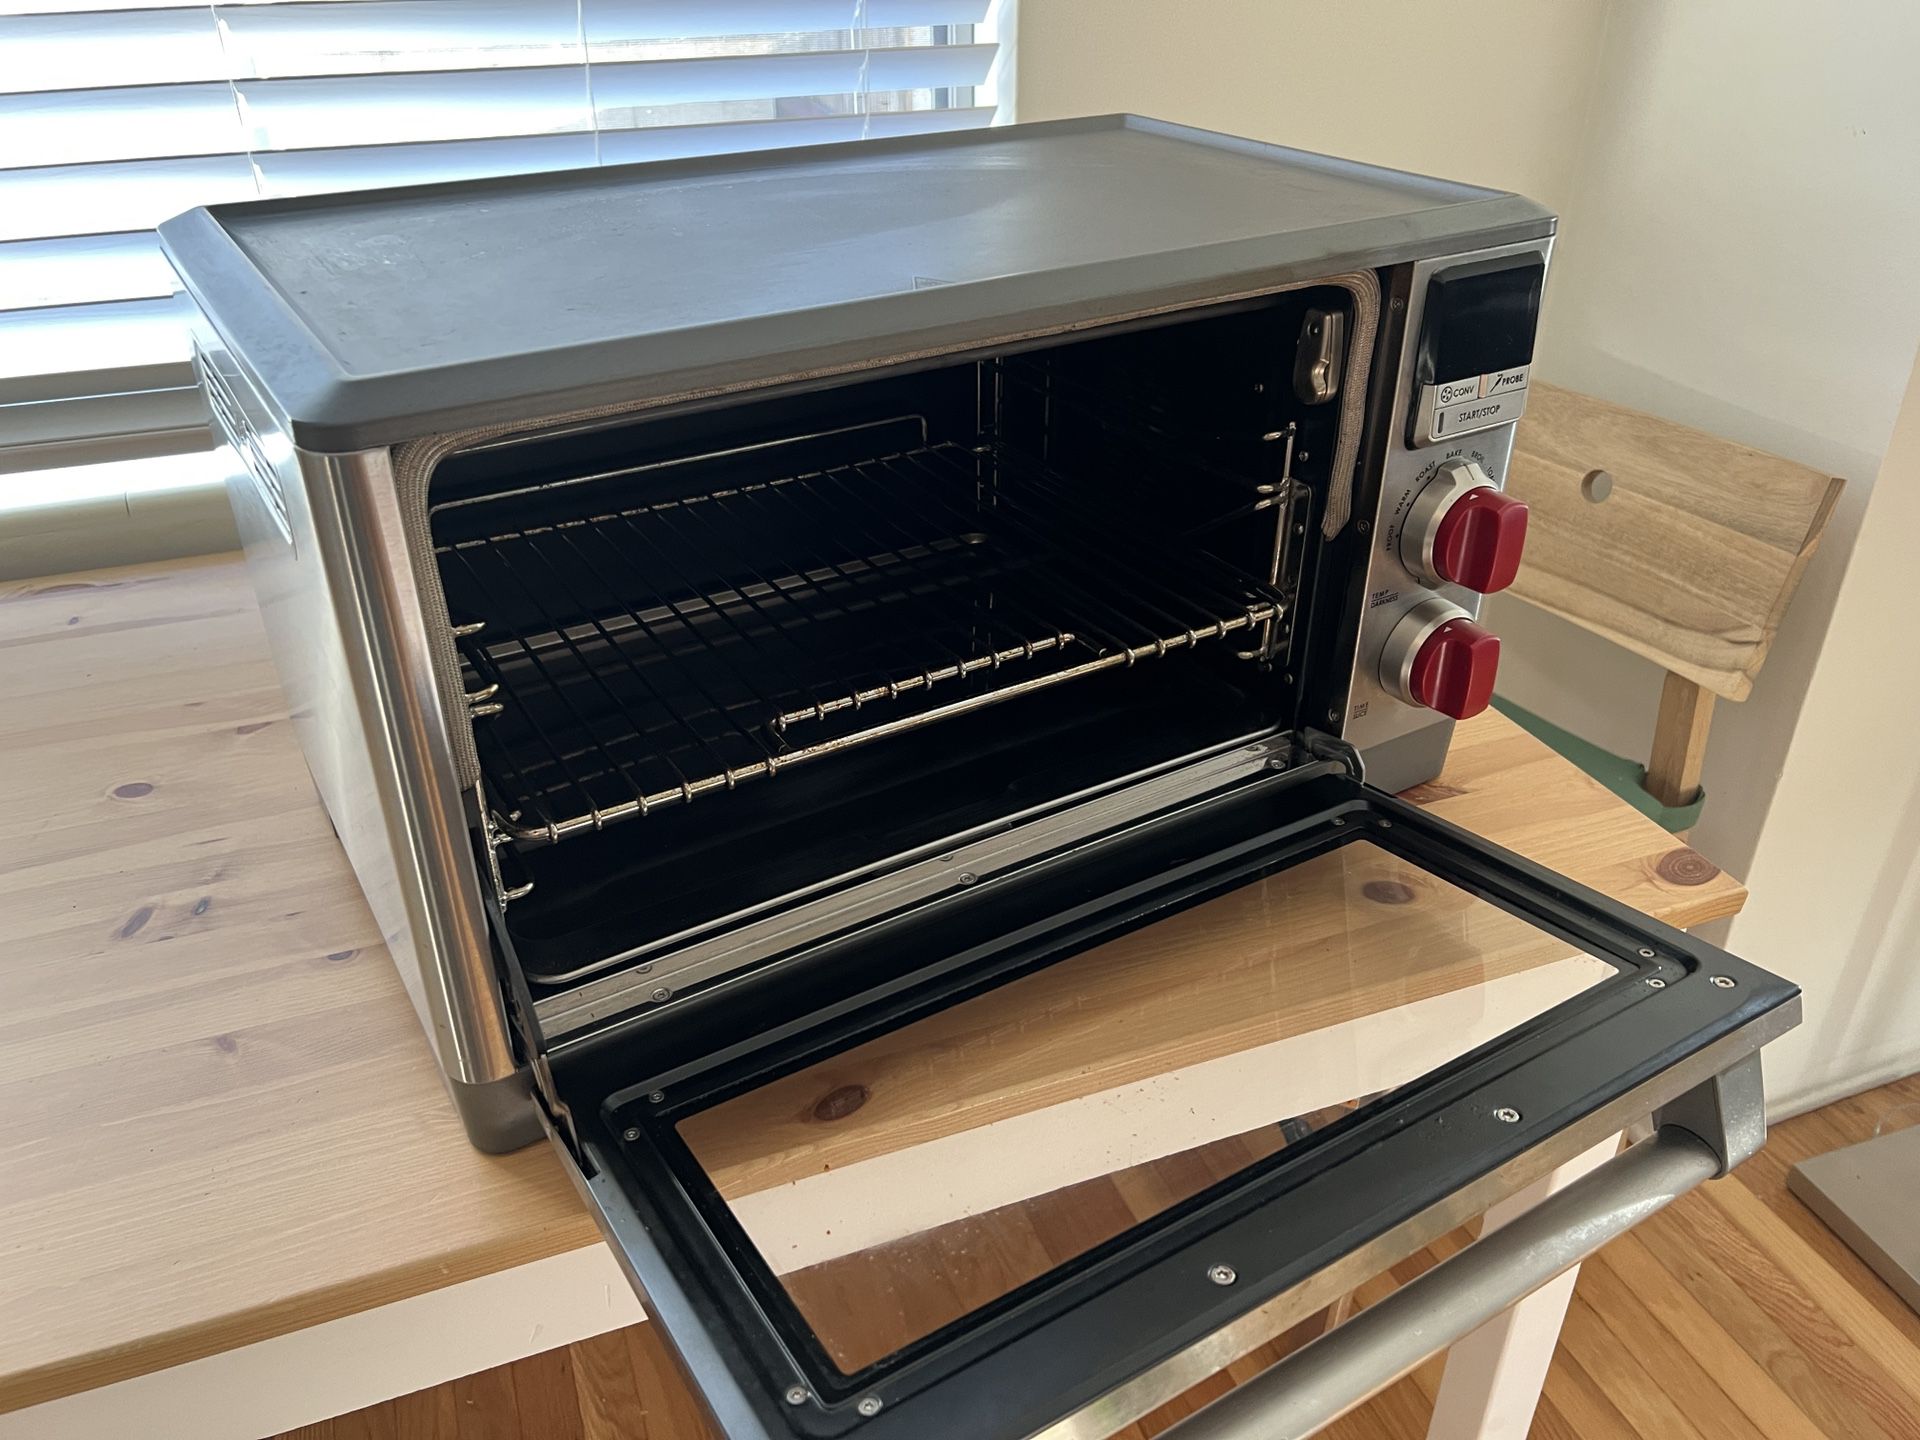 Wolf Countertop Convection Oven in Stainless Steel W/Red Knobs, NEW -  appliances - by owner - sale - craigslist